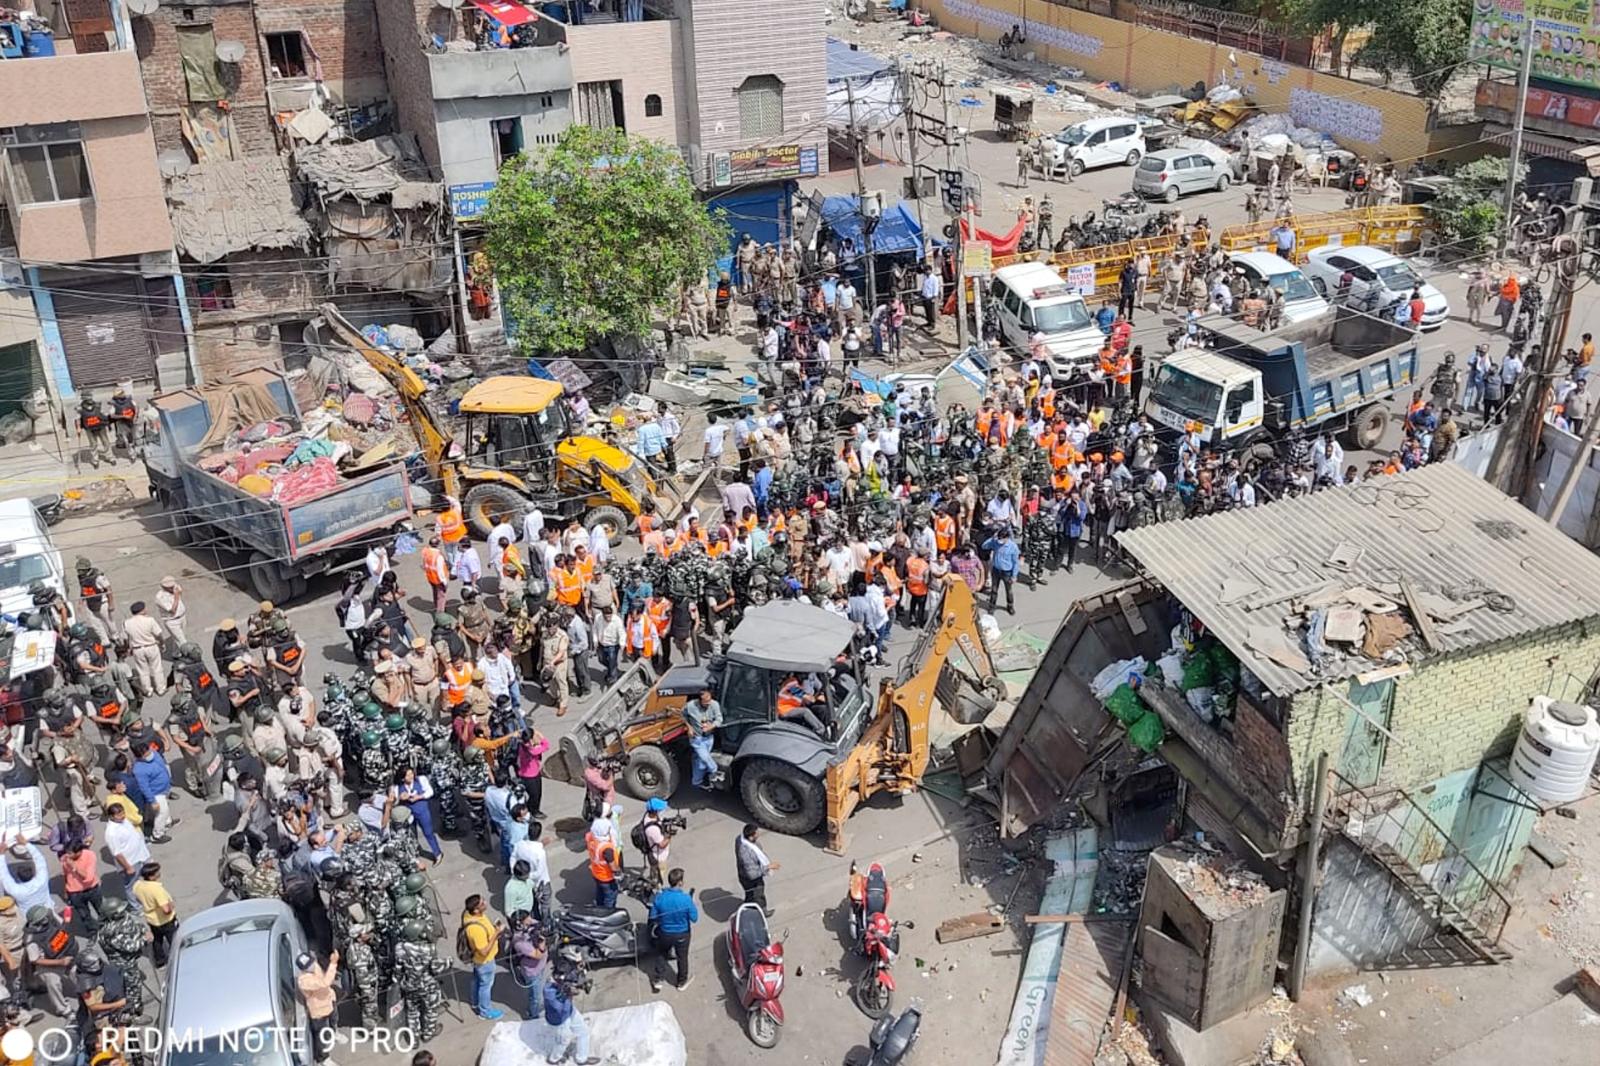 After an hour after the bulldozers reached Jahangirpuri area in New Delhi to begin an anti-encroachment drive, the Supreme Court halted the excercise and said it would take up the matter for hearing on Thursday. The top court has ordered status quo till then. The demolition drive comes days after communal clashes broke out in the area